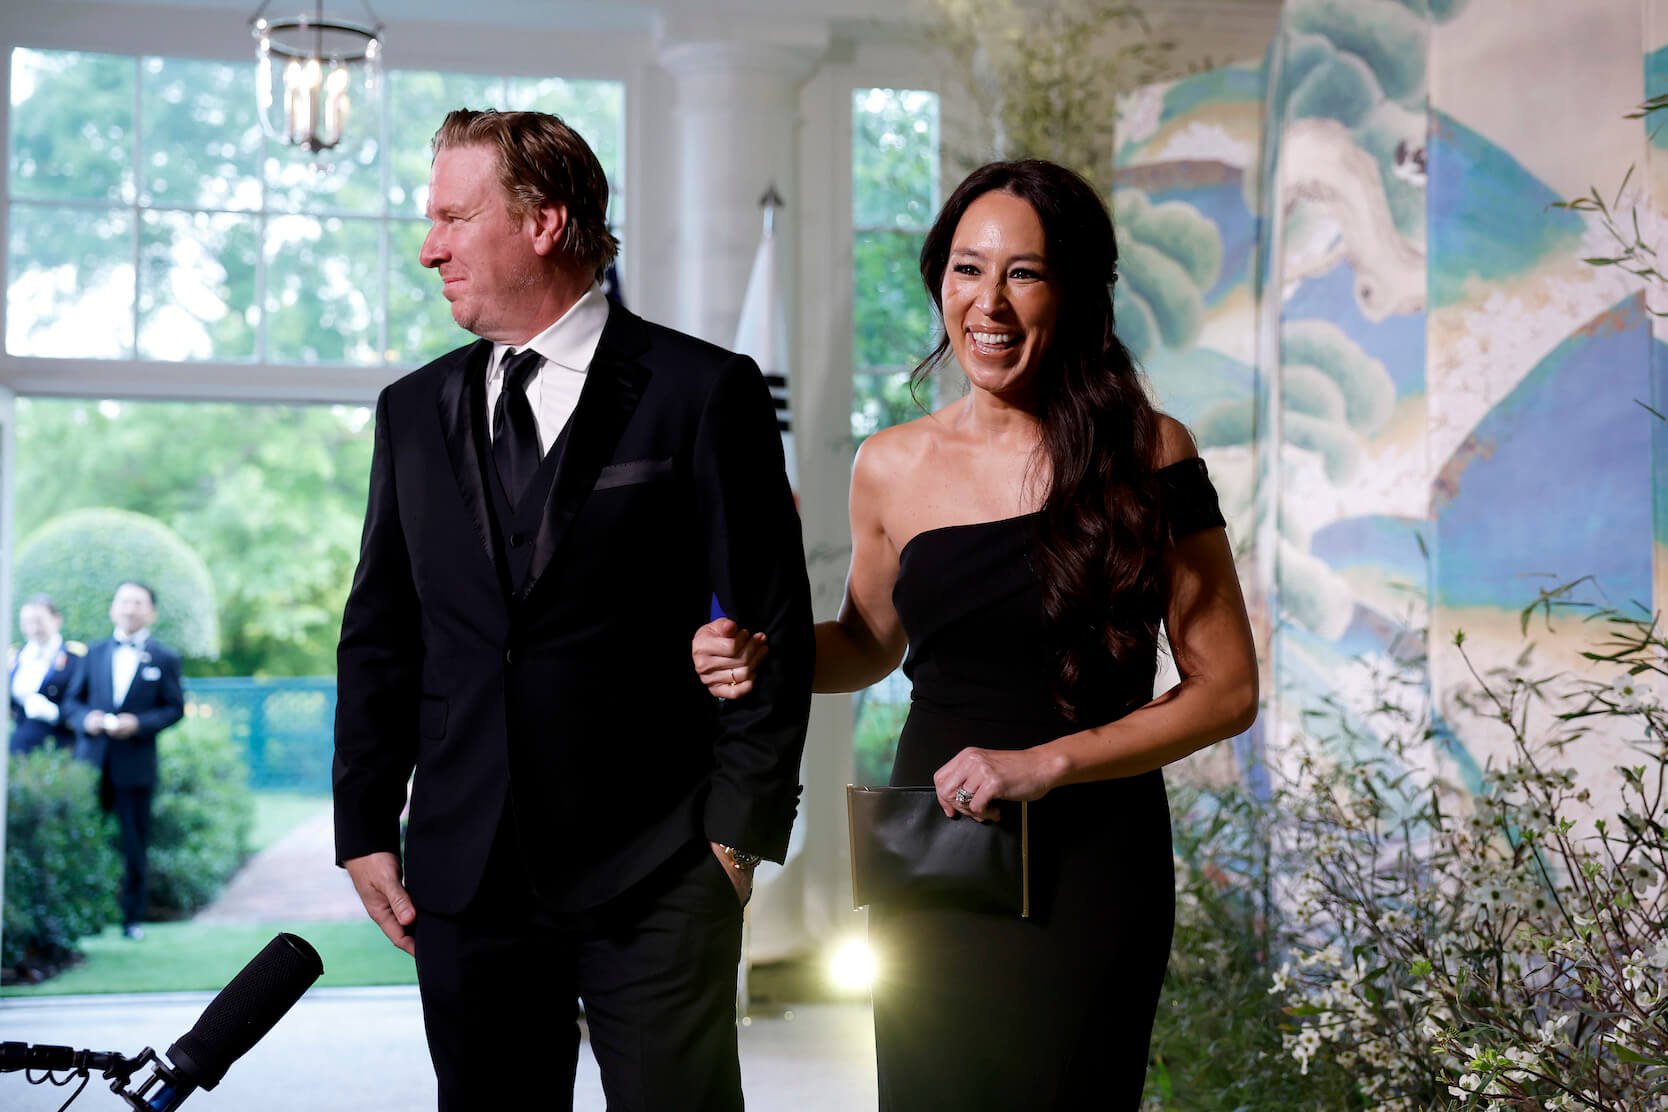 Chip and Joanna Gaines from 'Fixer Upper' in black formal attire walking arm in arm and smiling